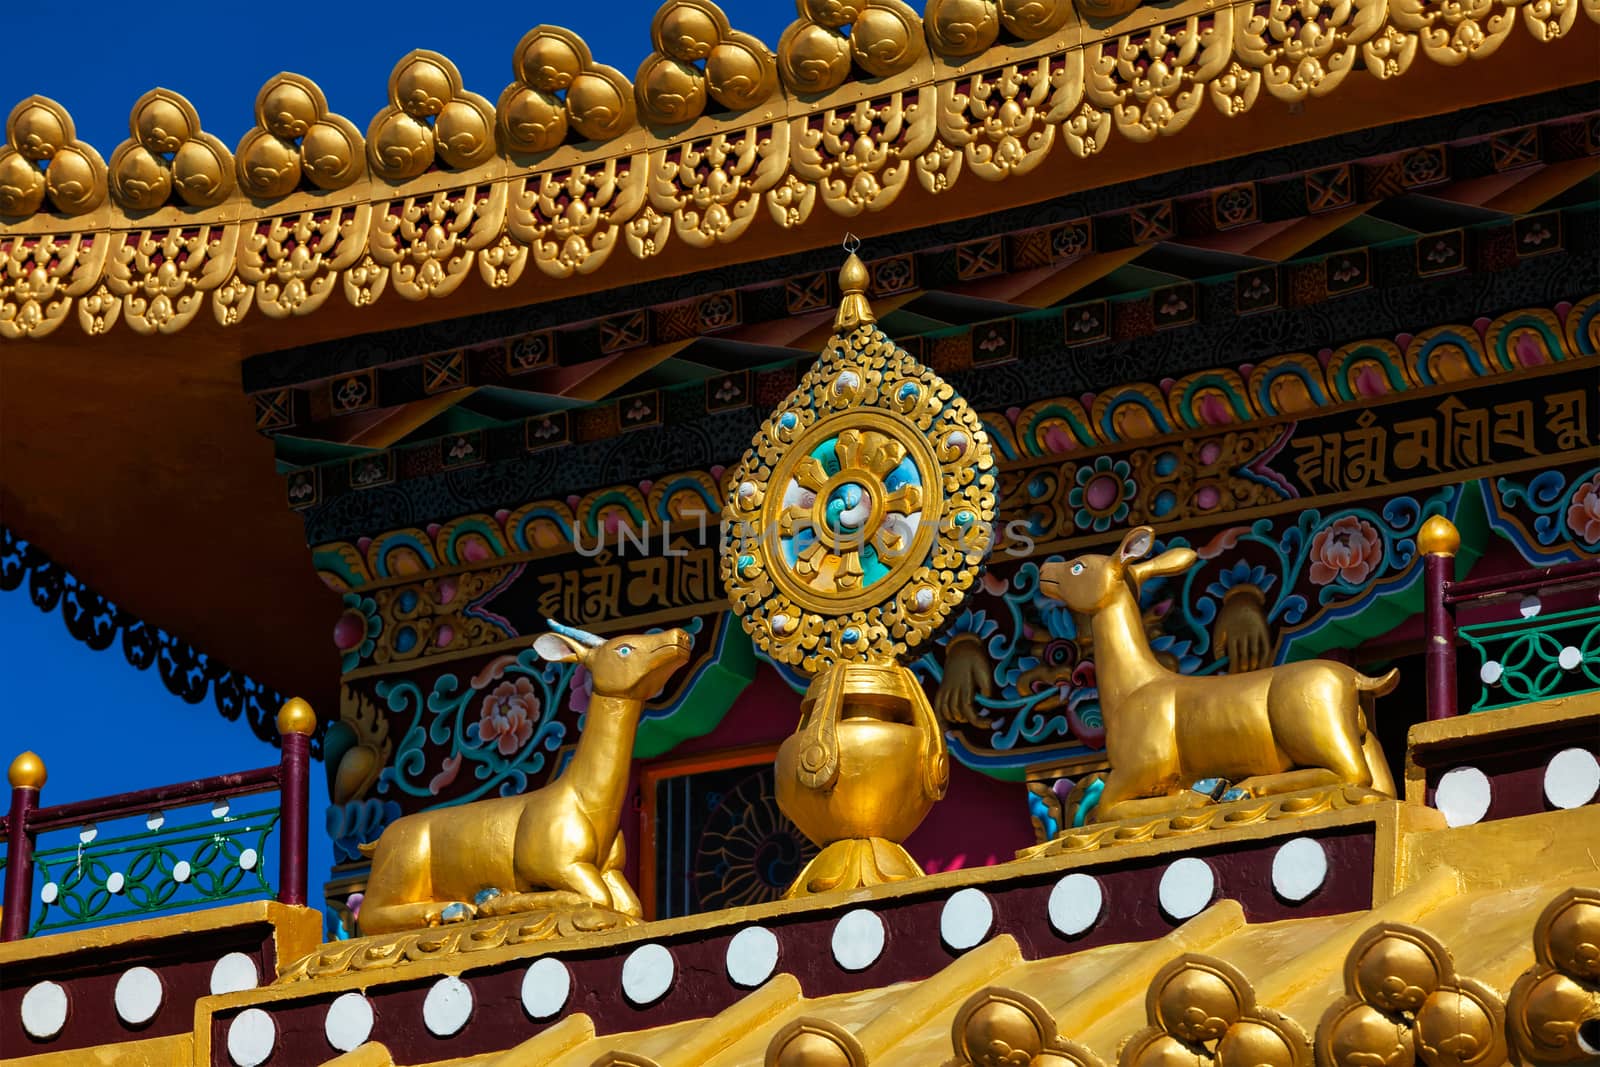 Buddhist Wheel of the Law on monastery, India by dimol